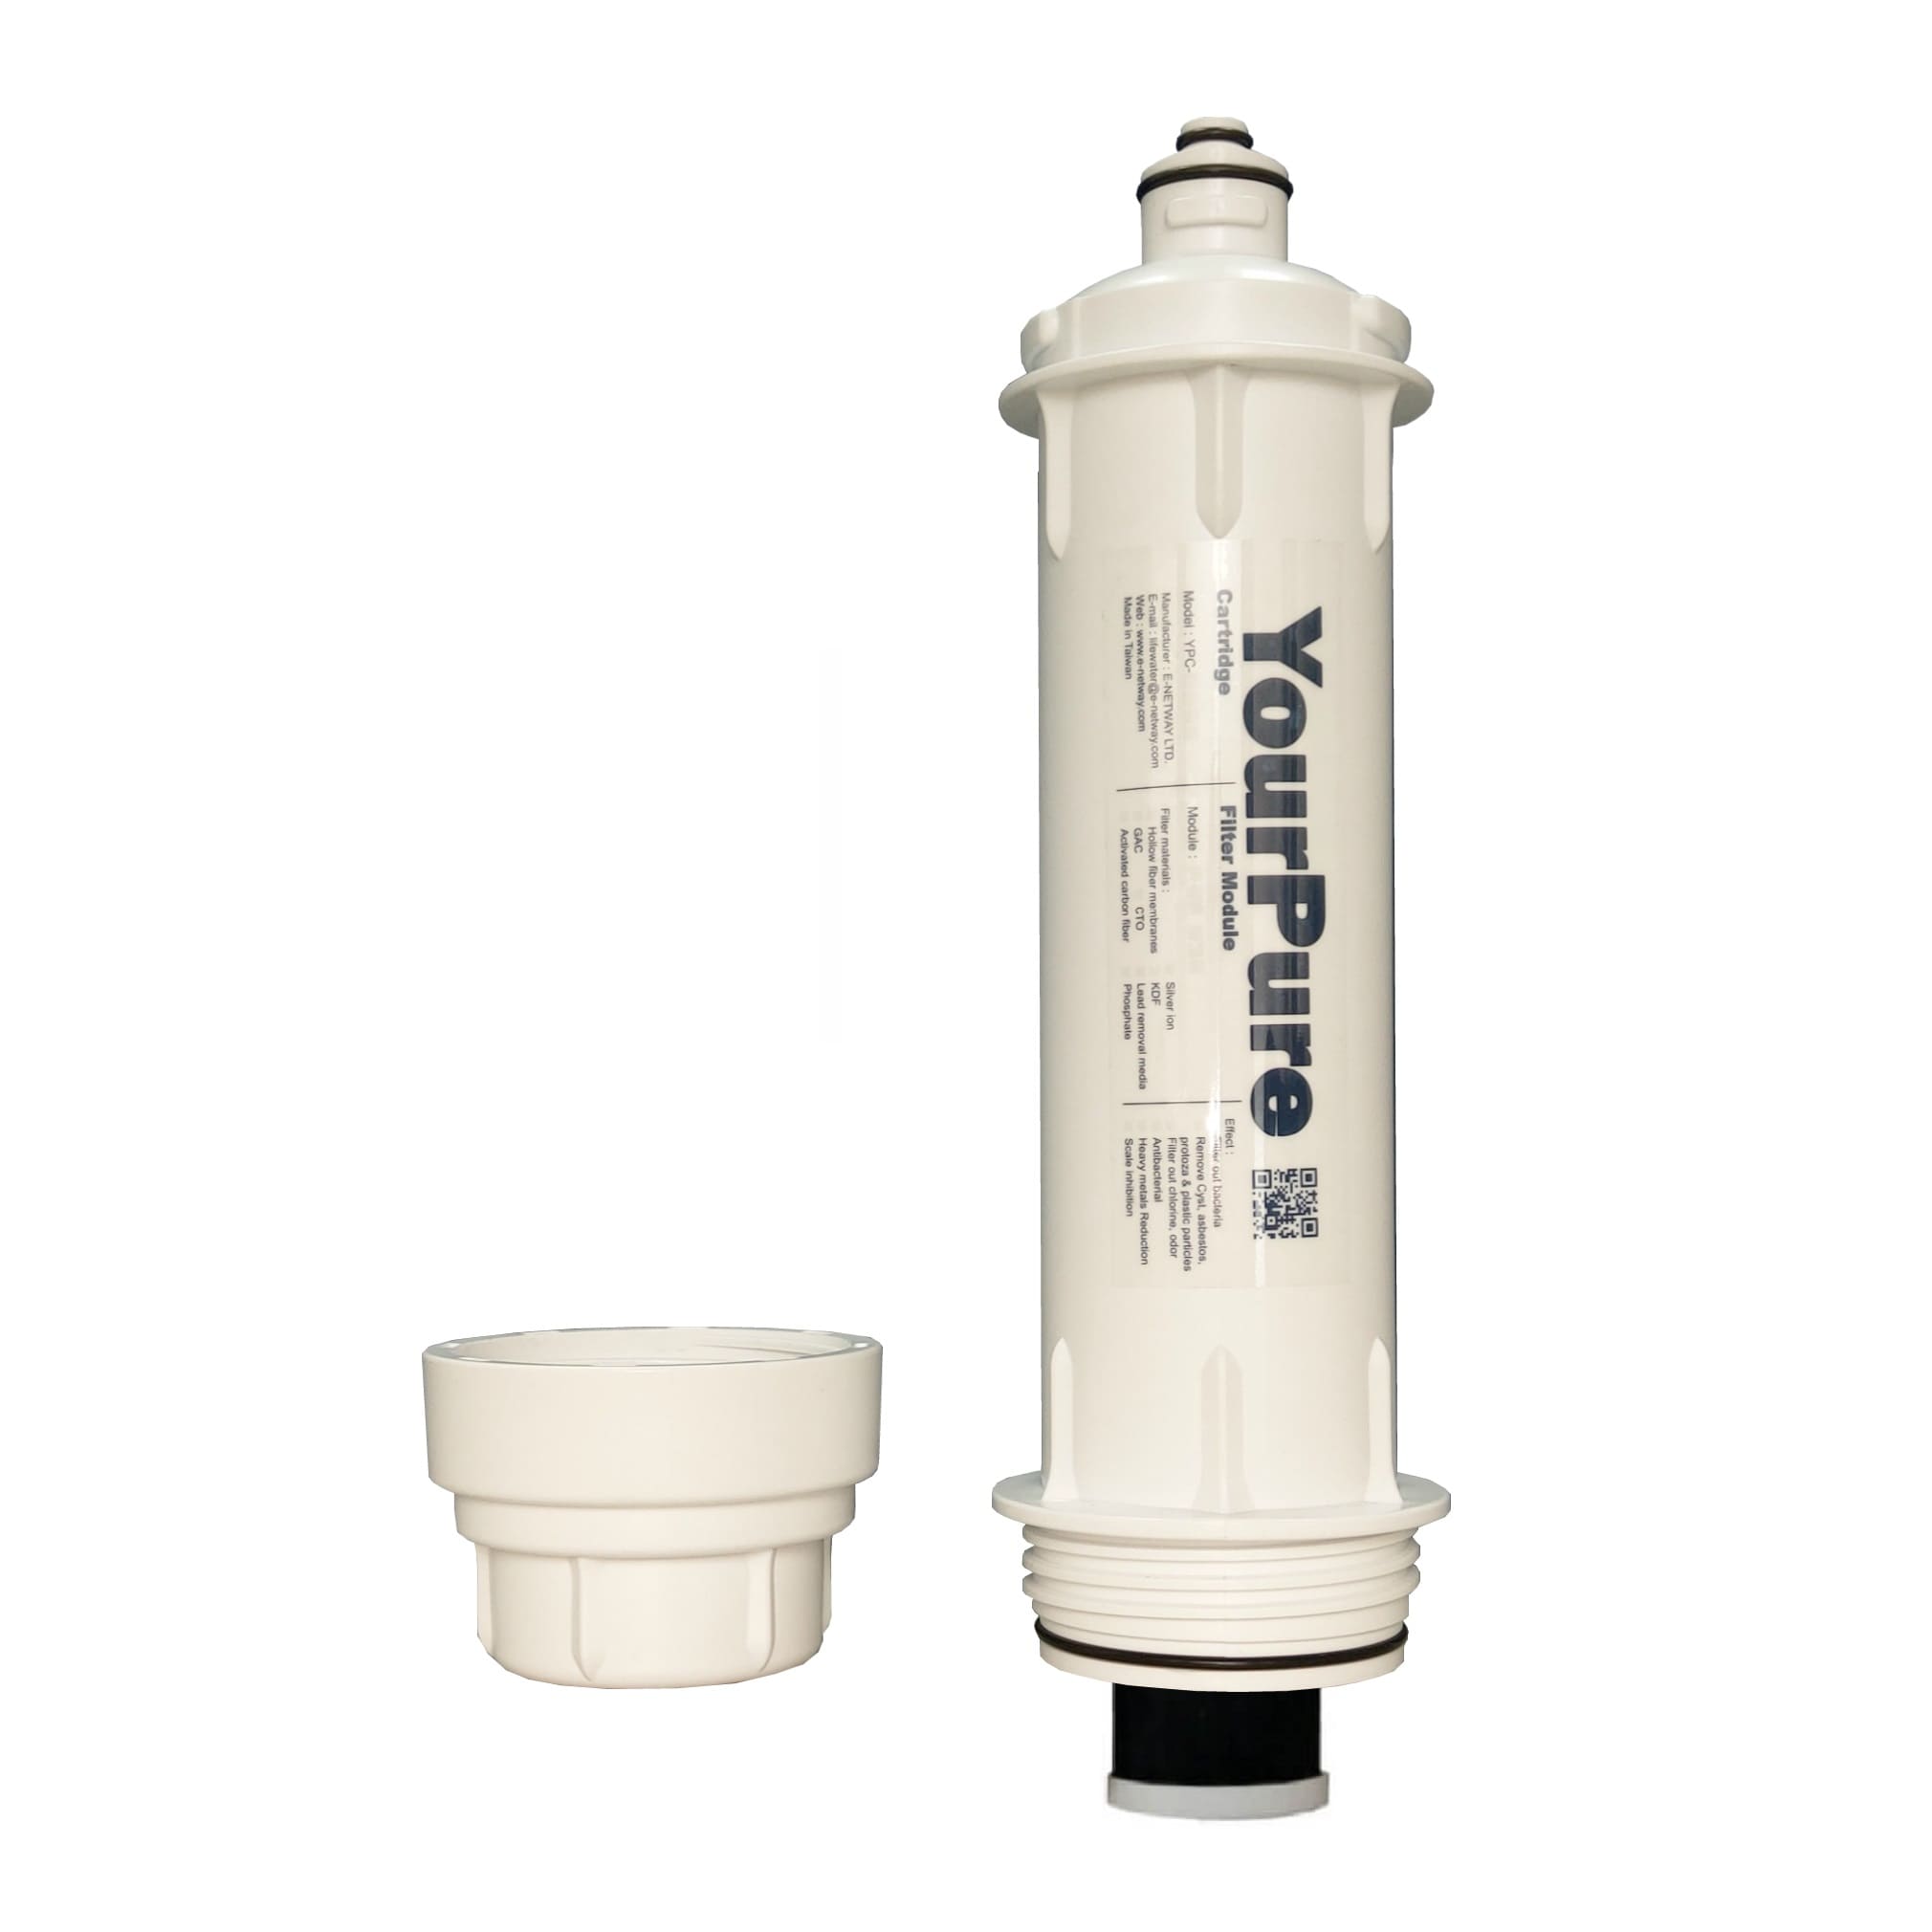 Chlorine and sterilization quick-release water purifier